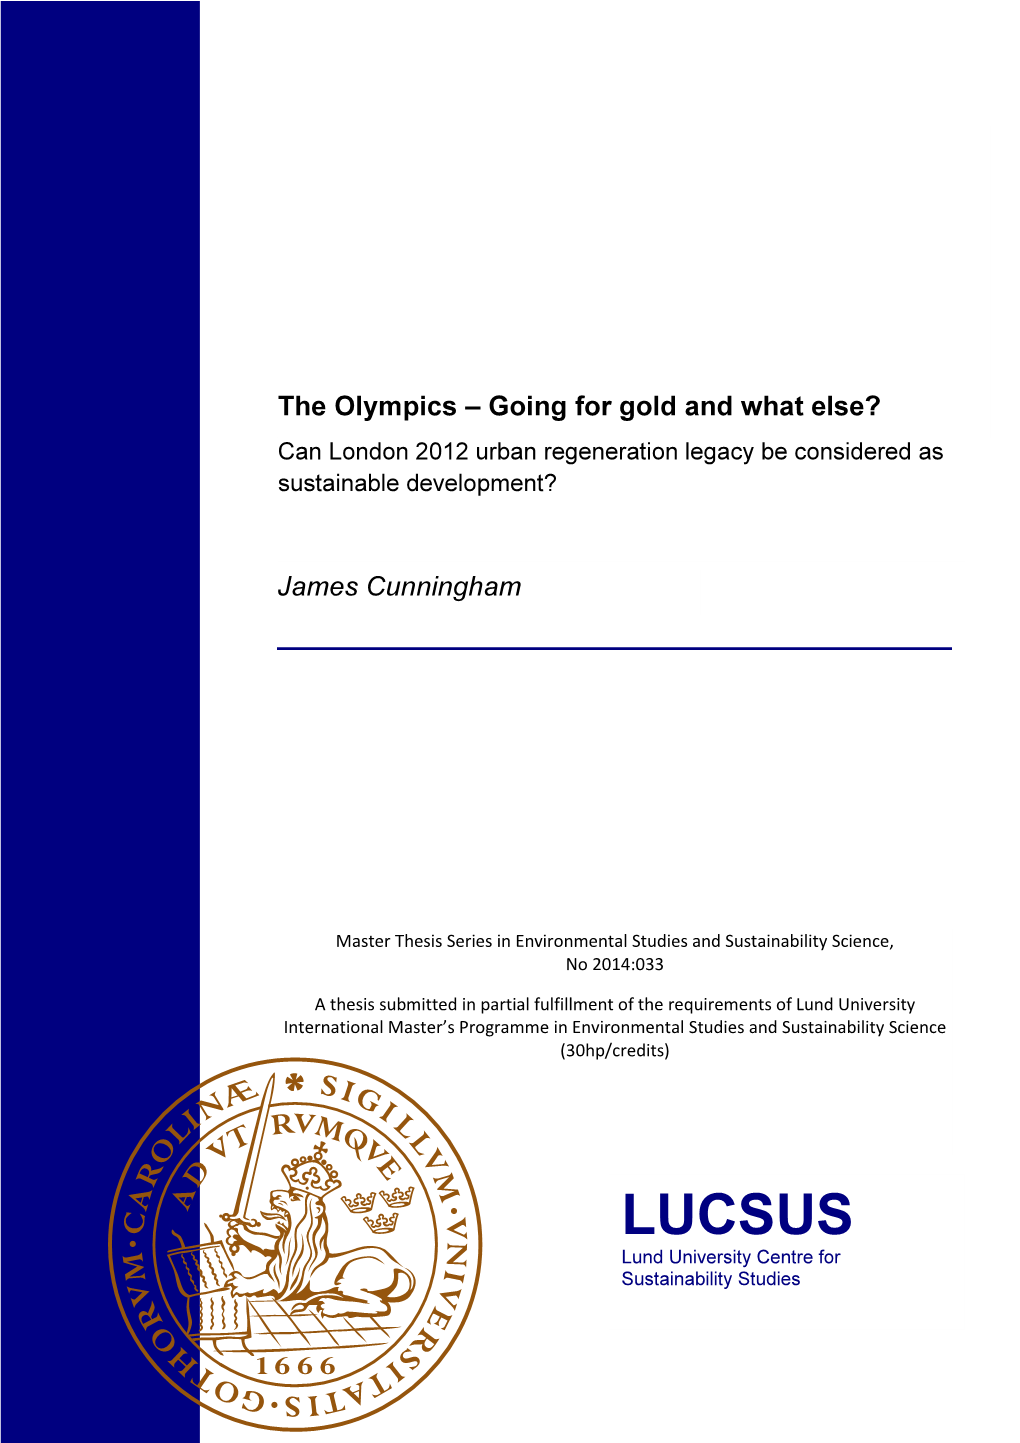 The Olympics – Going for Gold and What Else? Can London 2012 Urban Regeneration Legacy Be Considered As Sustainable Development?